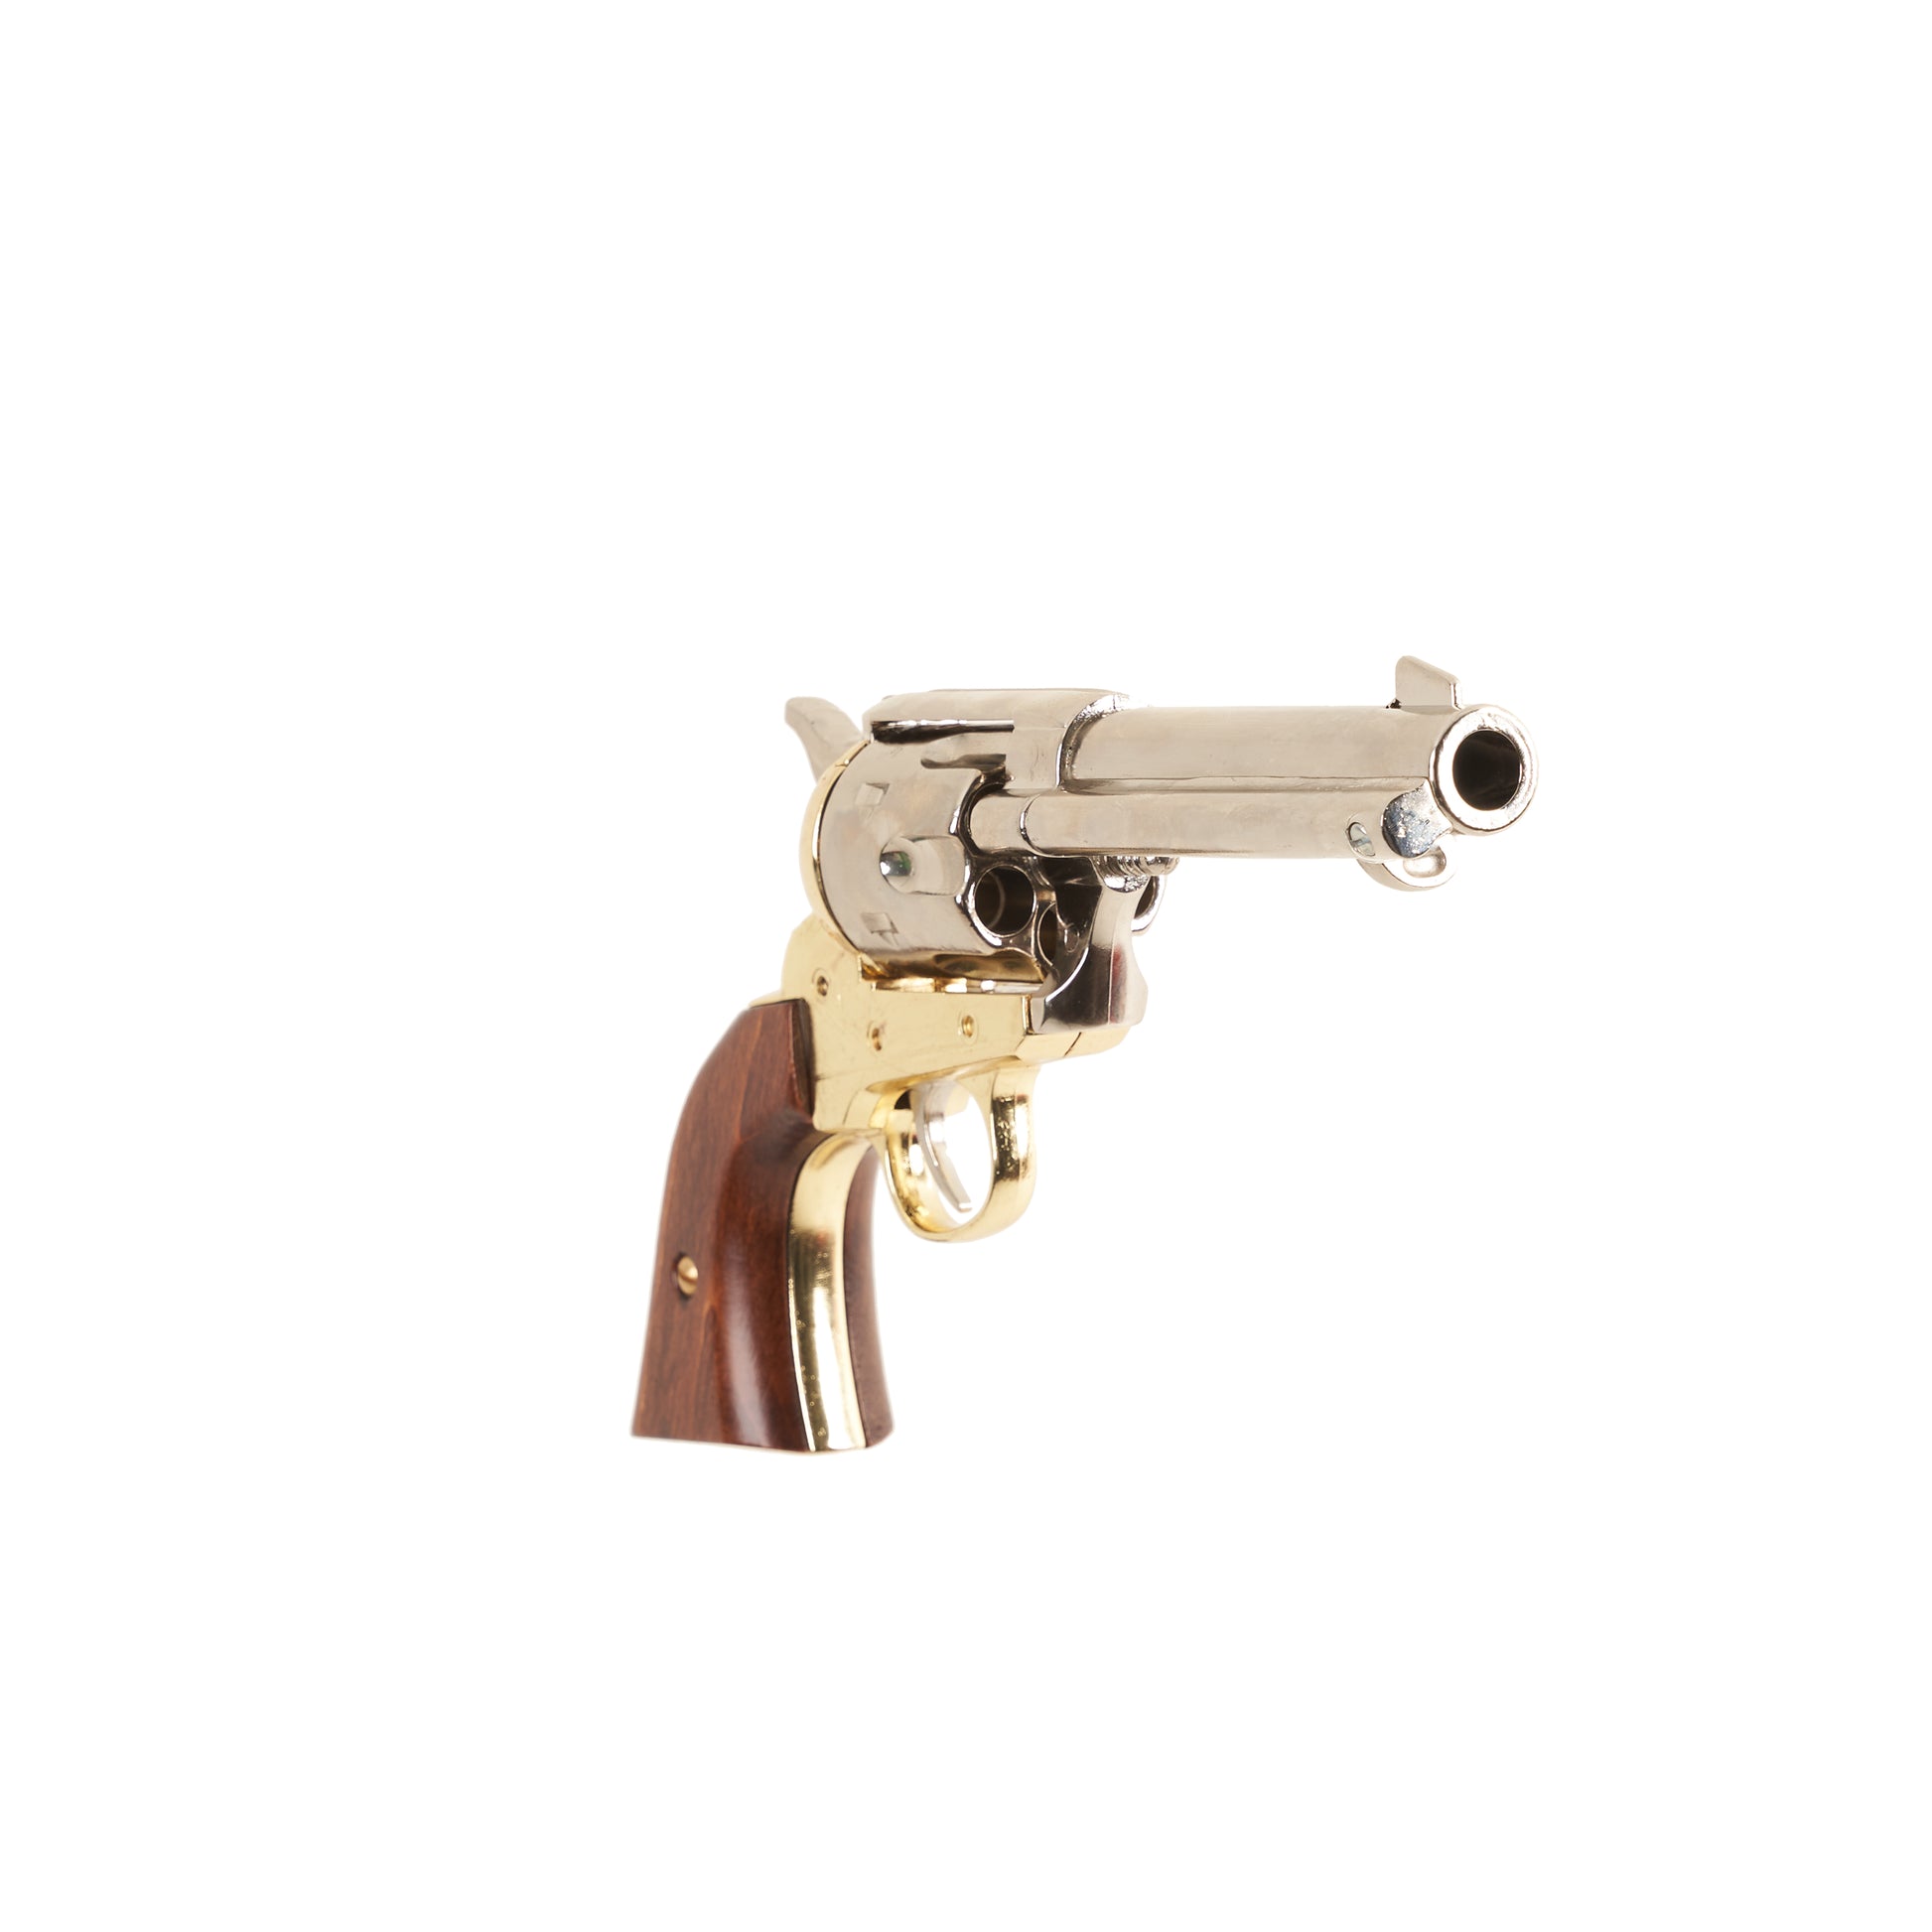 Front view of polished nickel Non-Firing 1873 Fast Draw Revovler with brass trigger guard and wood grip.